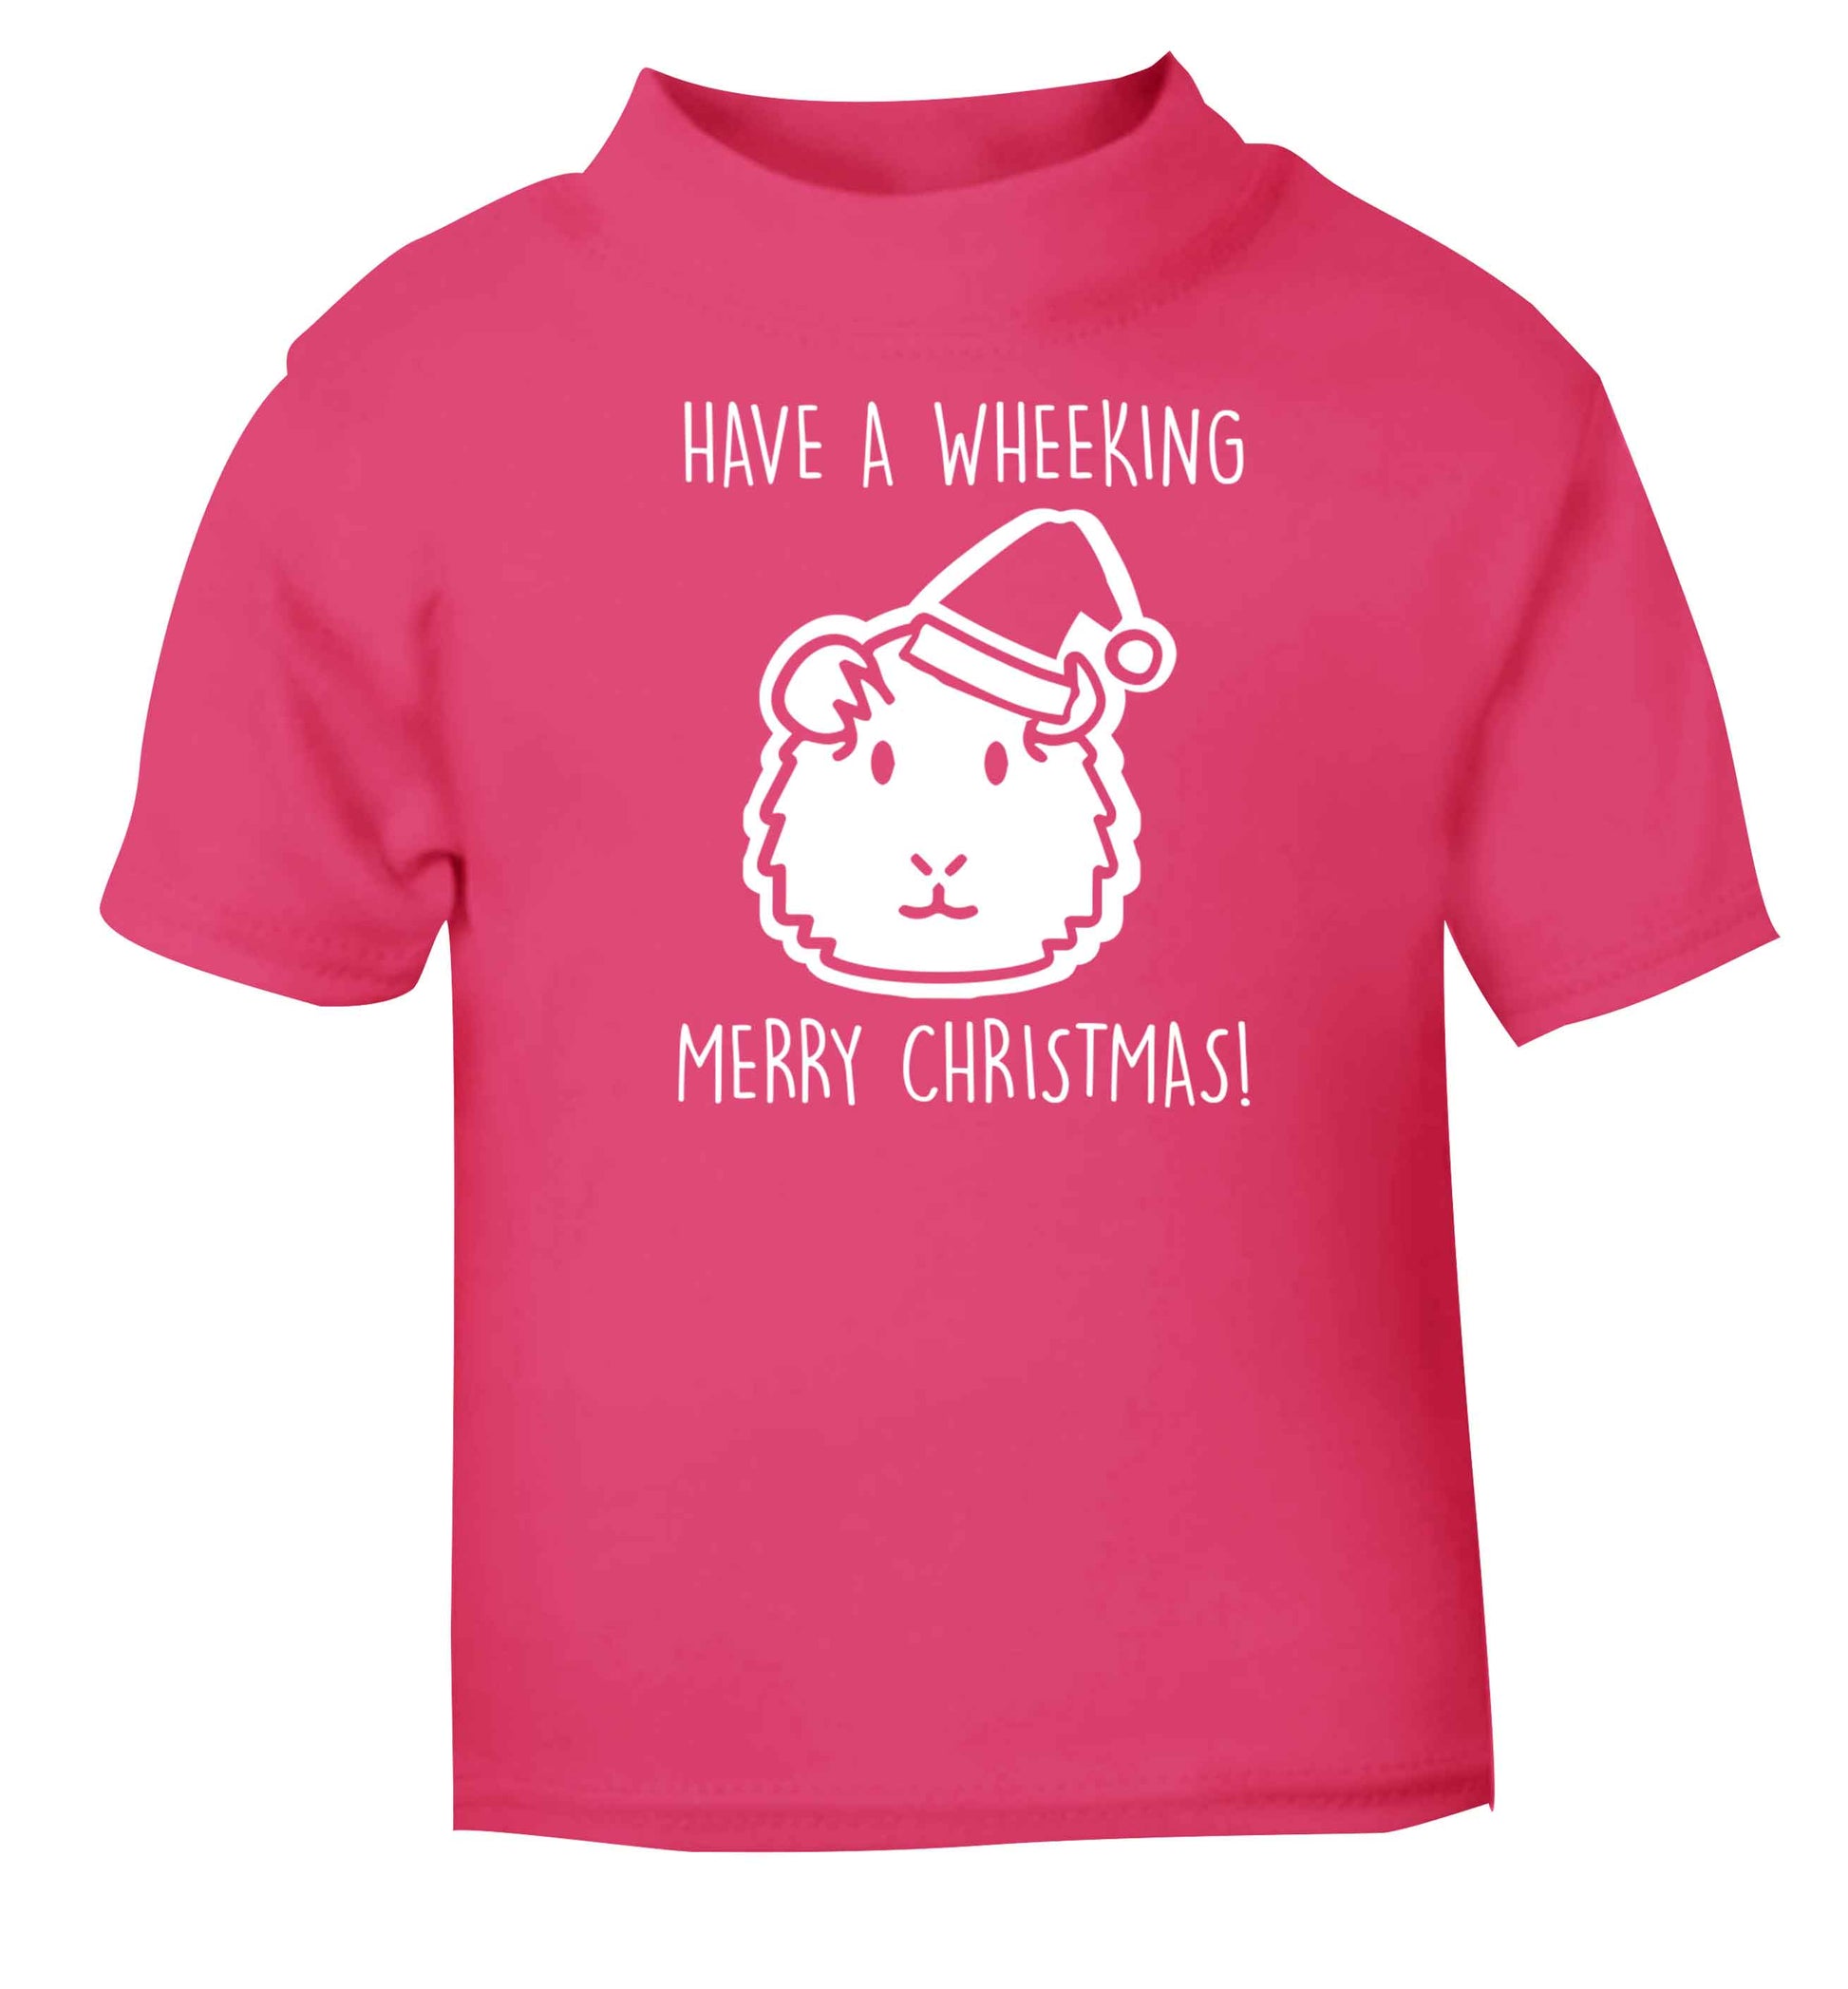 Have a wheeking merry Christmas pink baby toddler Tshirt 2 Years